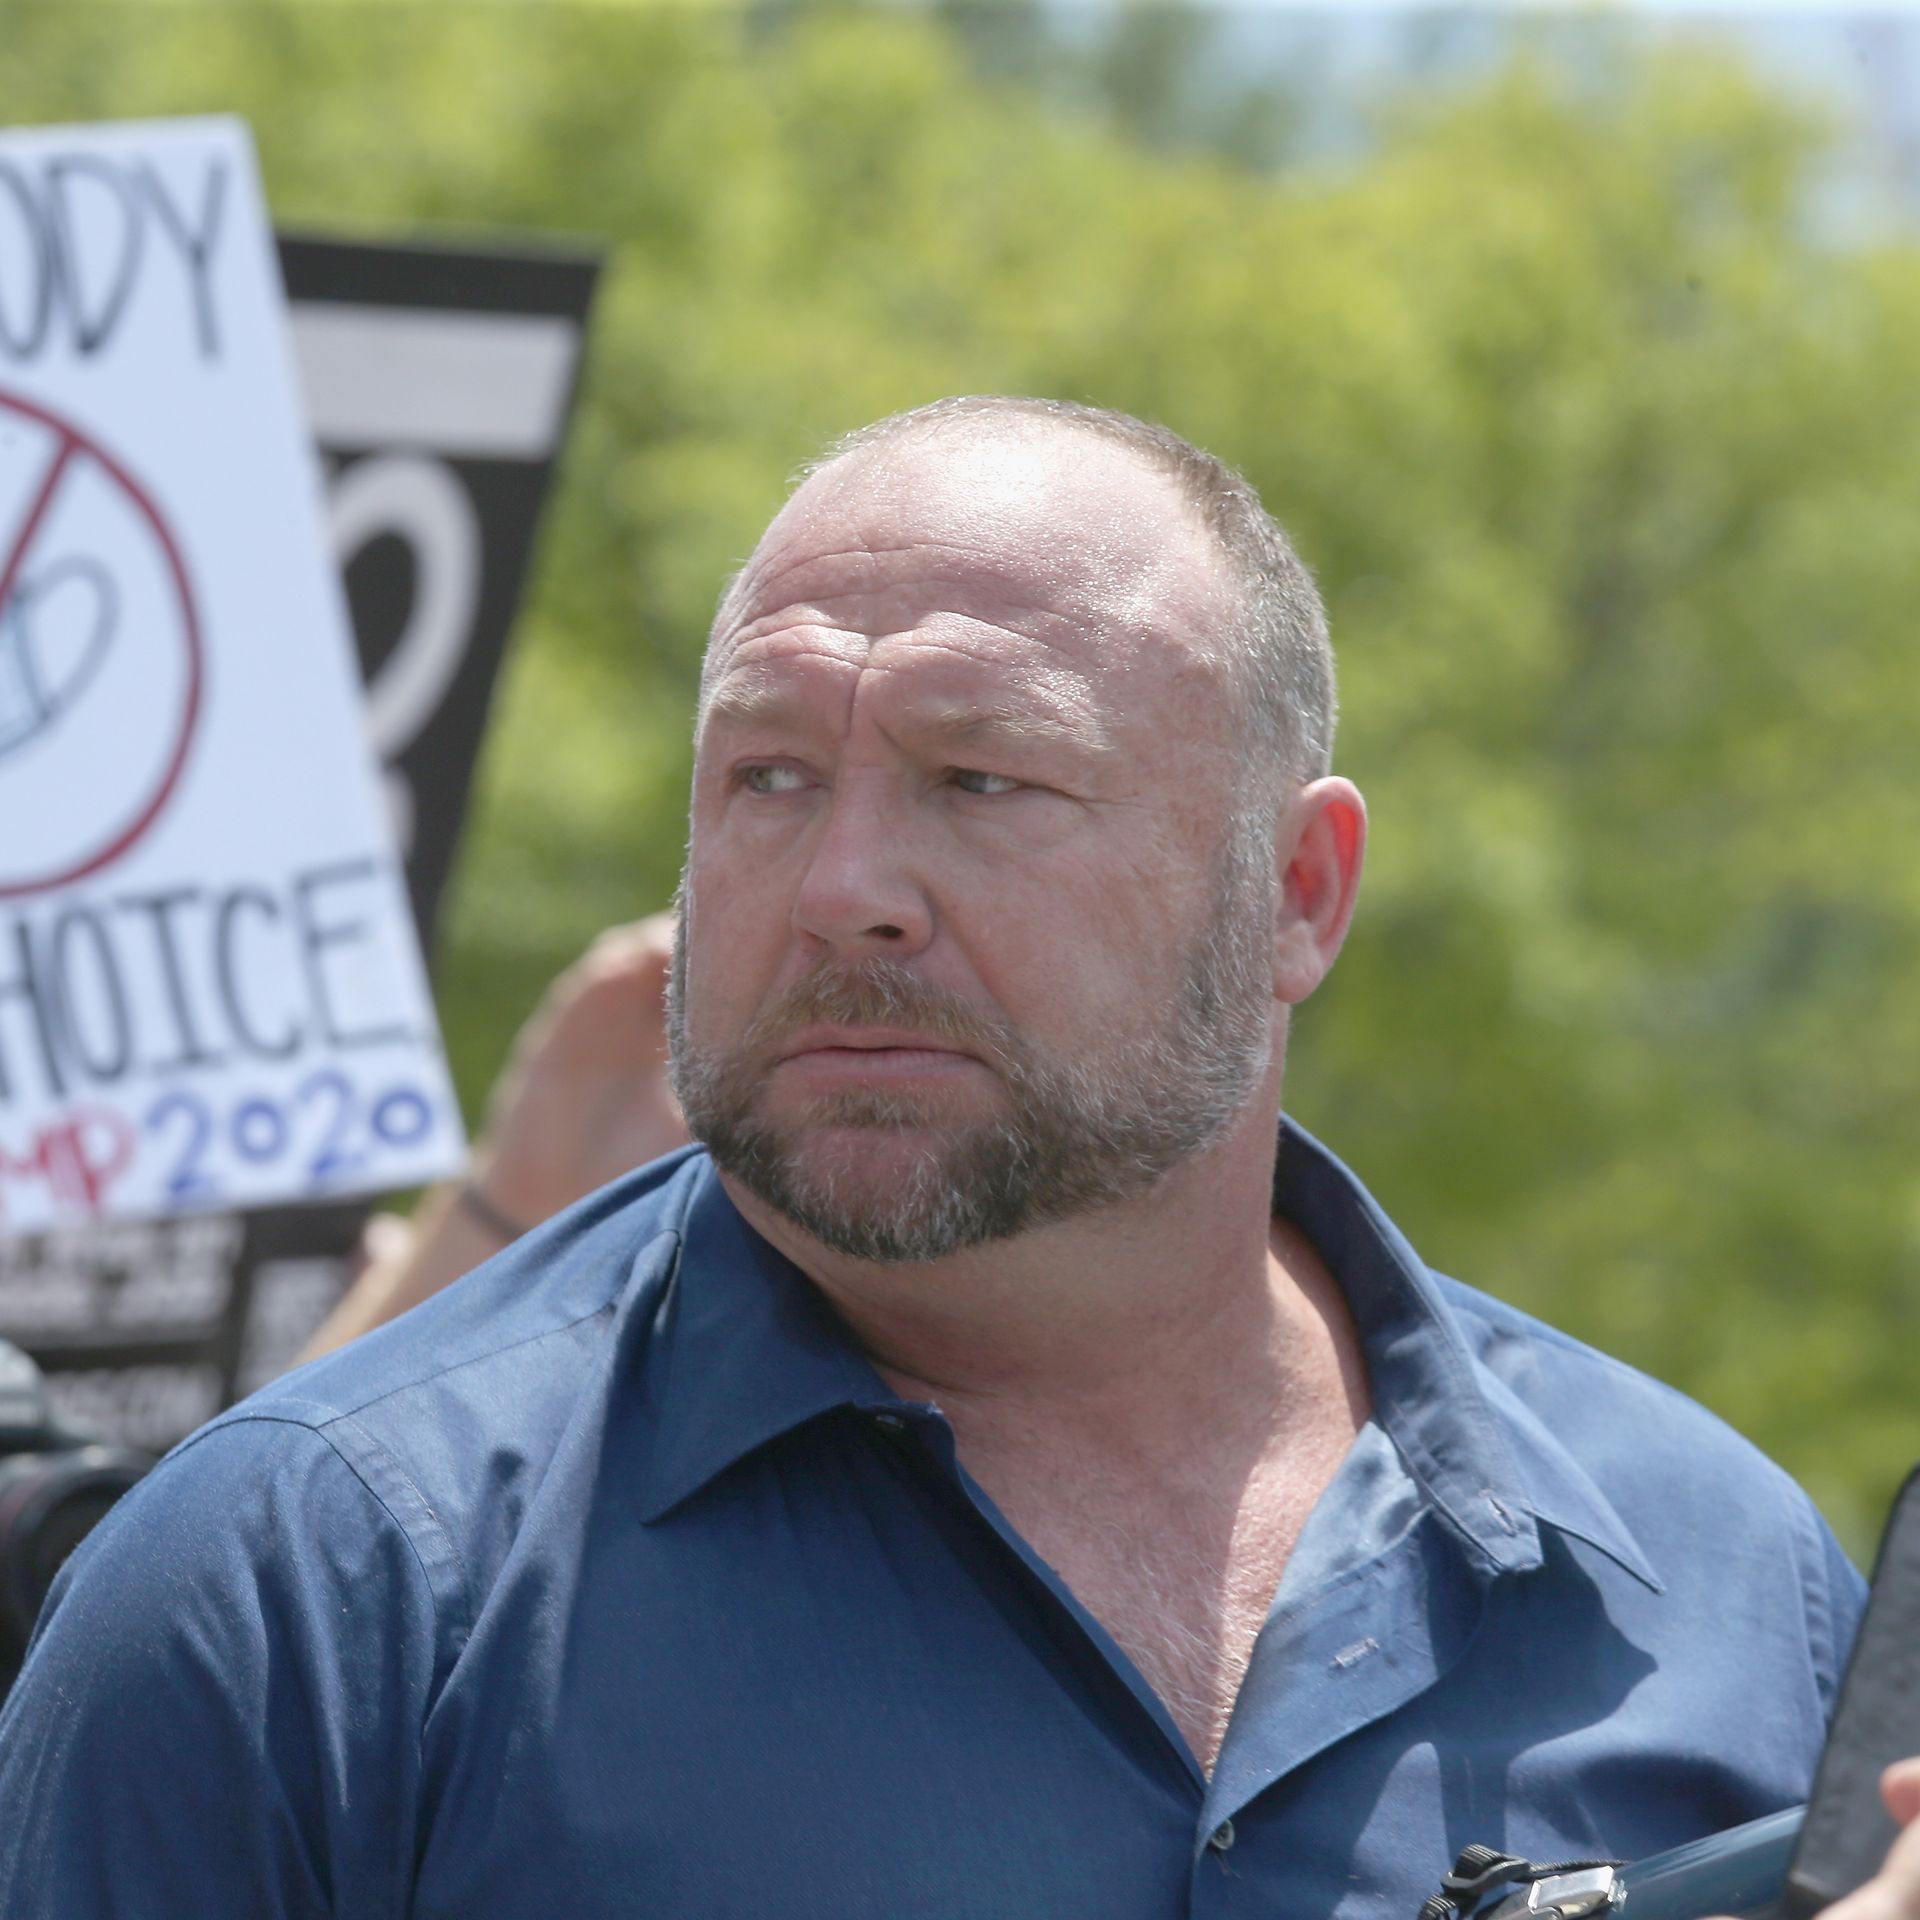 Alex Jones during a protest at the Texas State Capitol in Austin in April 2020.